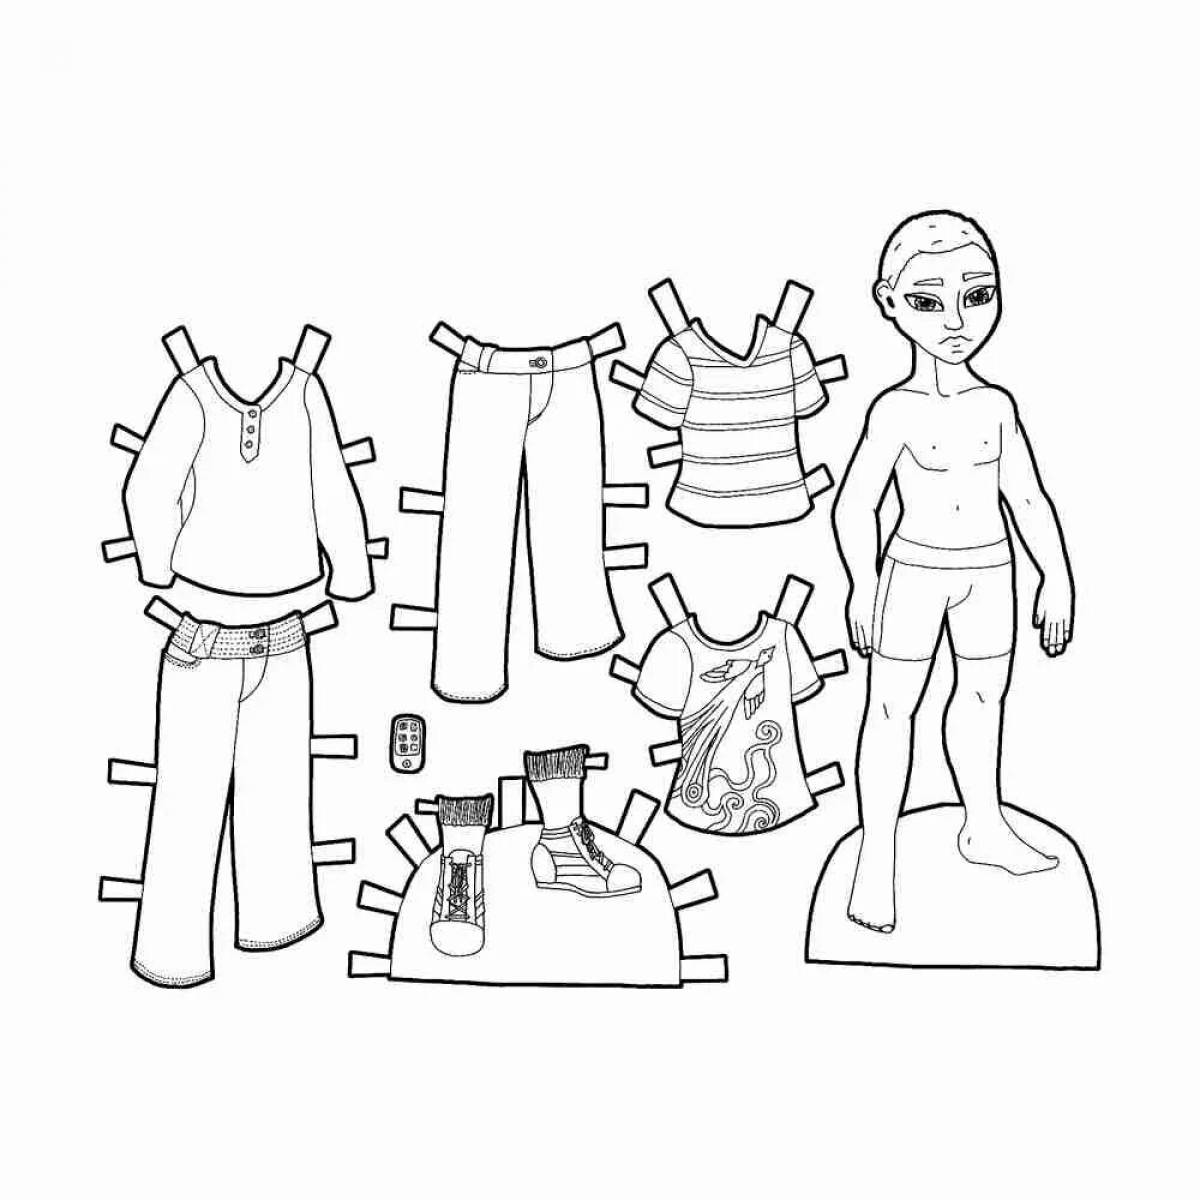 Paper doll boy with cutout clothes #20